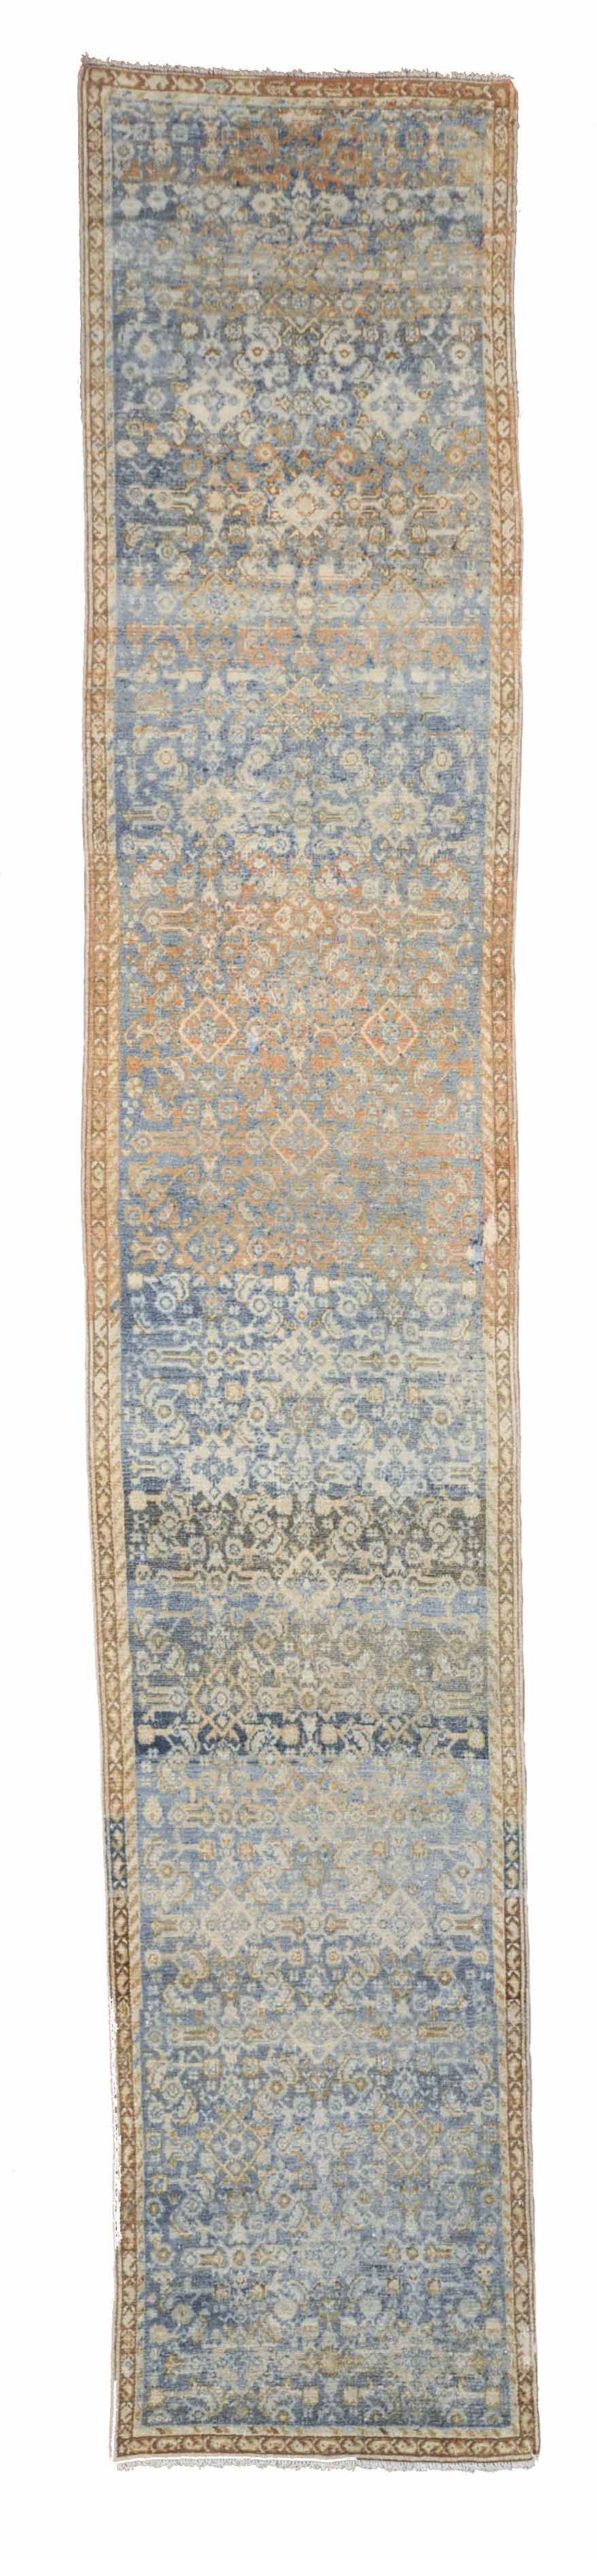 Rugs-and-More-Vintage Persian Rug